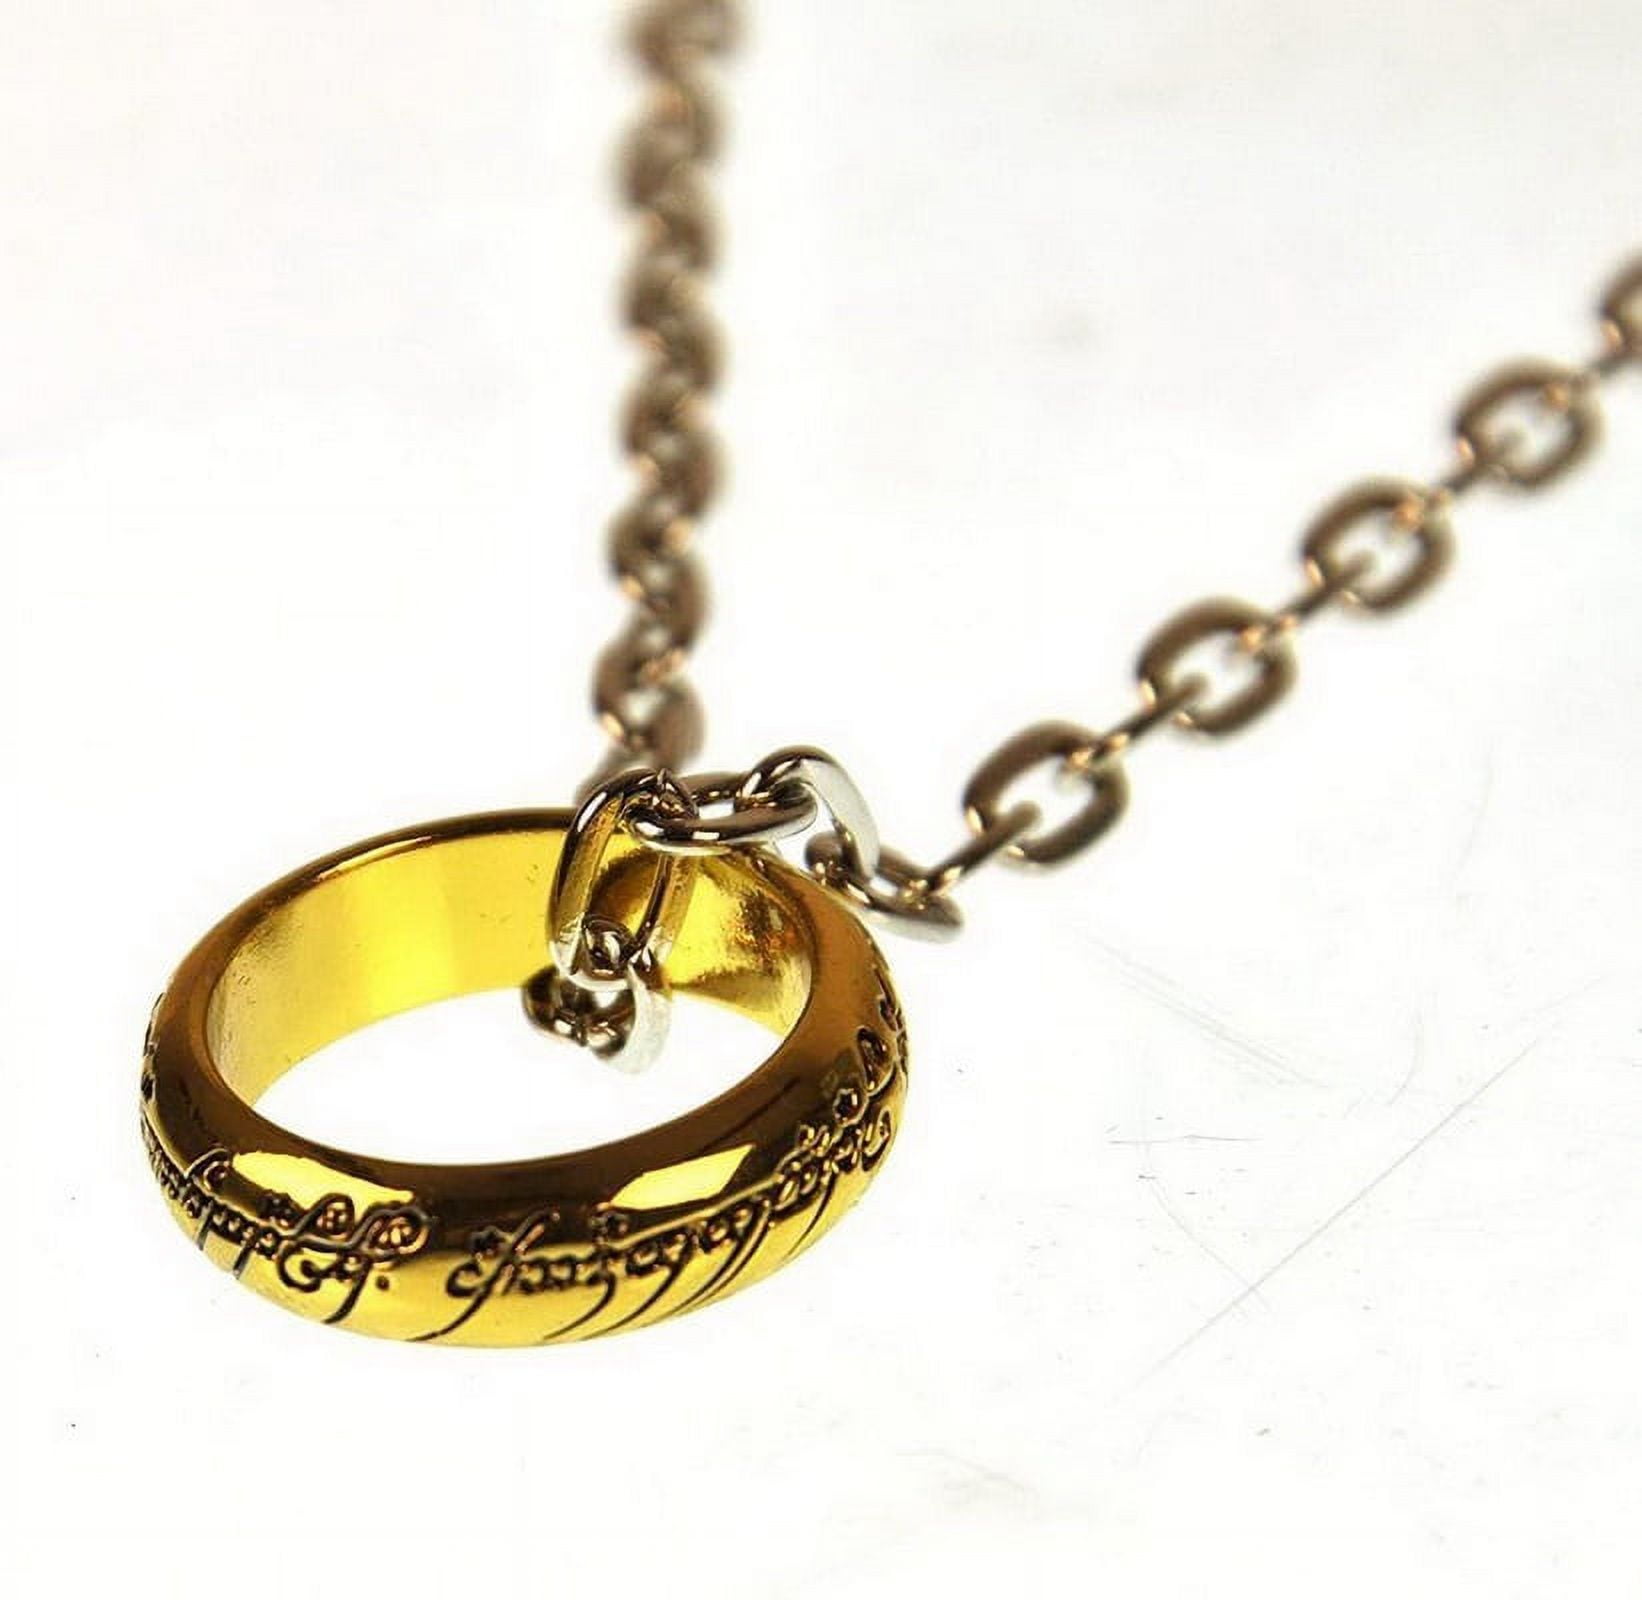 Lord of the Rings Necklace LOTR Jewelry The One Ring of Power - Gold Plated  New | eBay